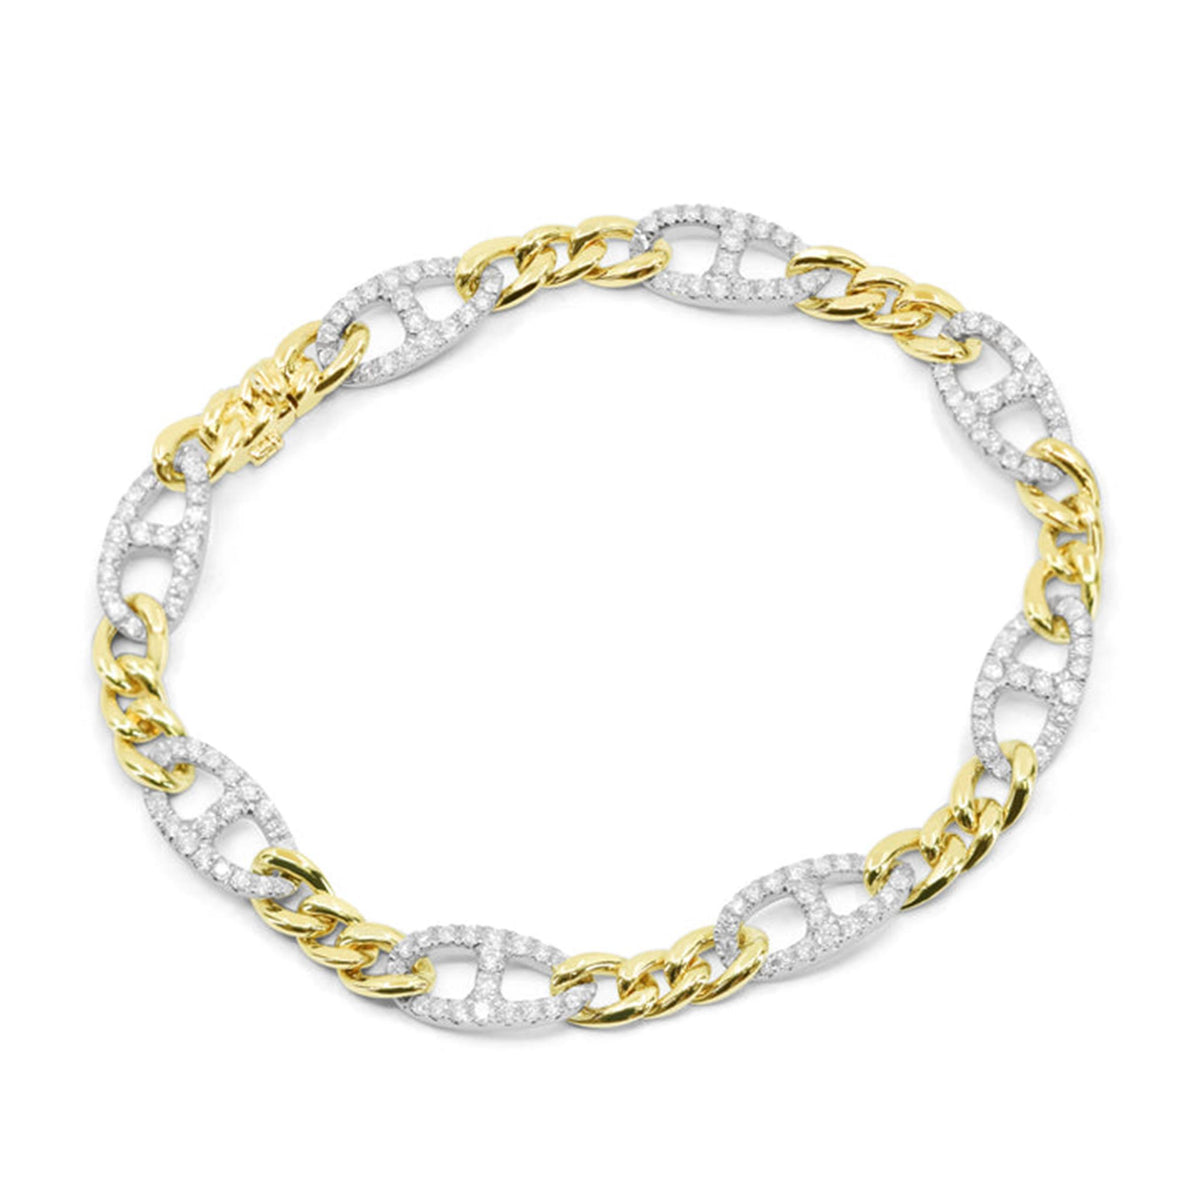 14Kt Yellow & White Gold Curb Link Bracelet With 1.64cttw Natural Diamonds